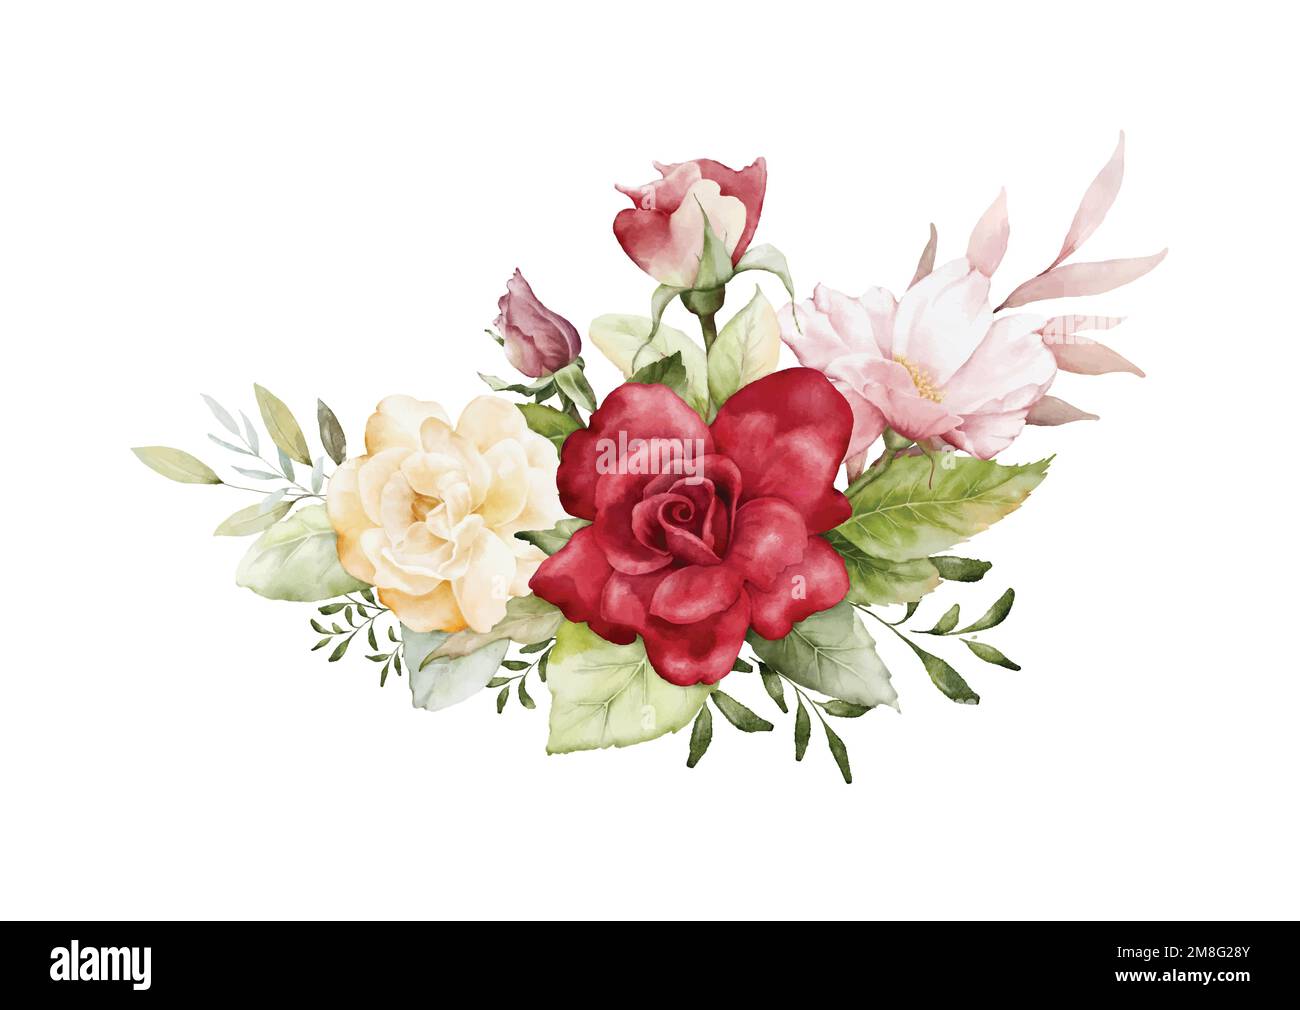 Watercolor arrangements with rose flowers. Bouquets of rose pink, red, yellow, and leaves composition for wedding, Valentine or greeting cards. Botani Stock Vector